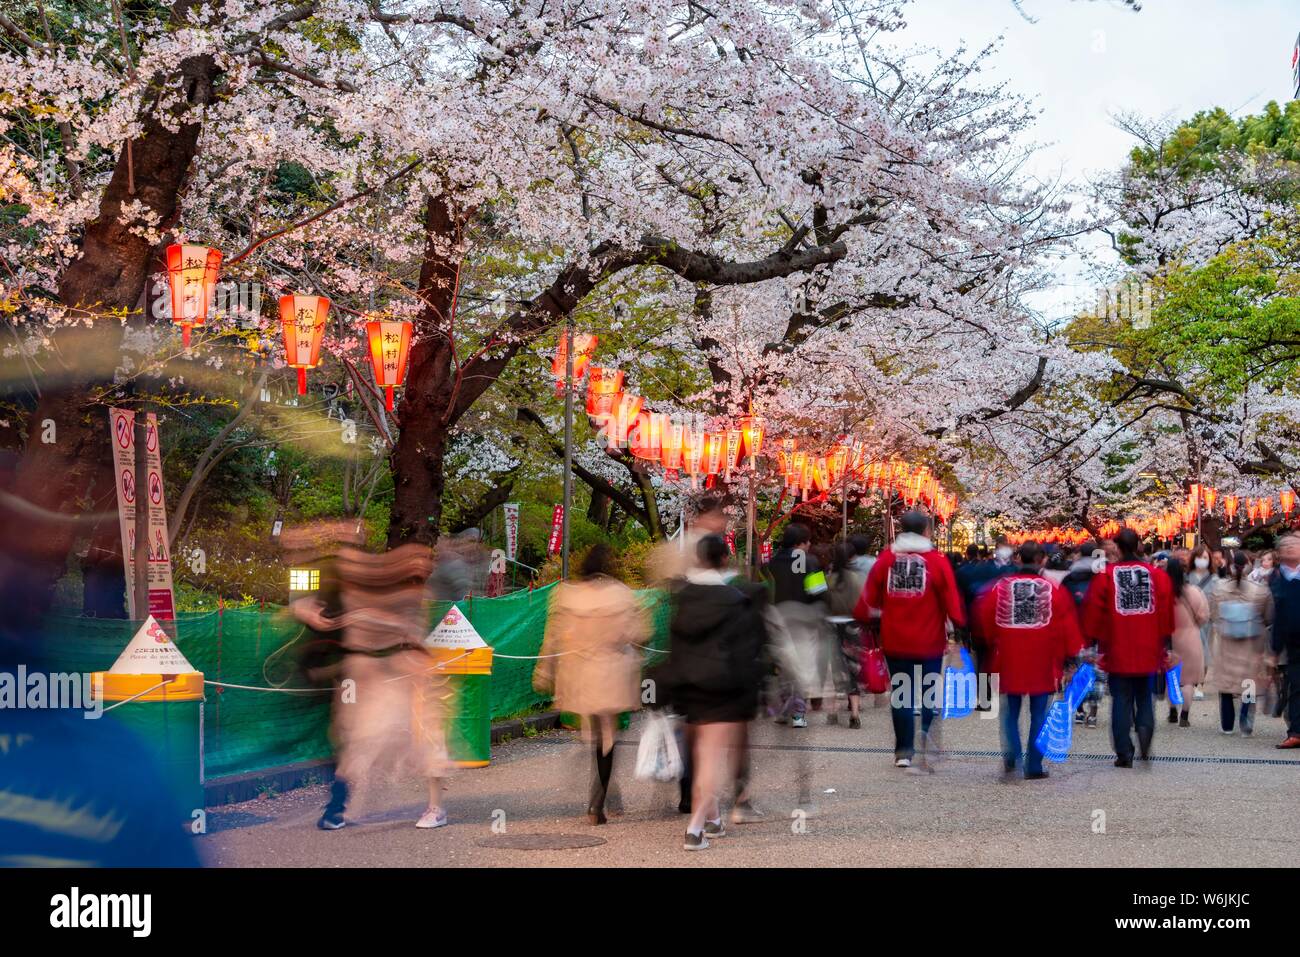 Crowd under glowing lanterns in blossoming cherry trees at Hanami Festival in Spring, Ueno Park, Tokyo, Japan Stock Photo